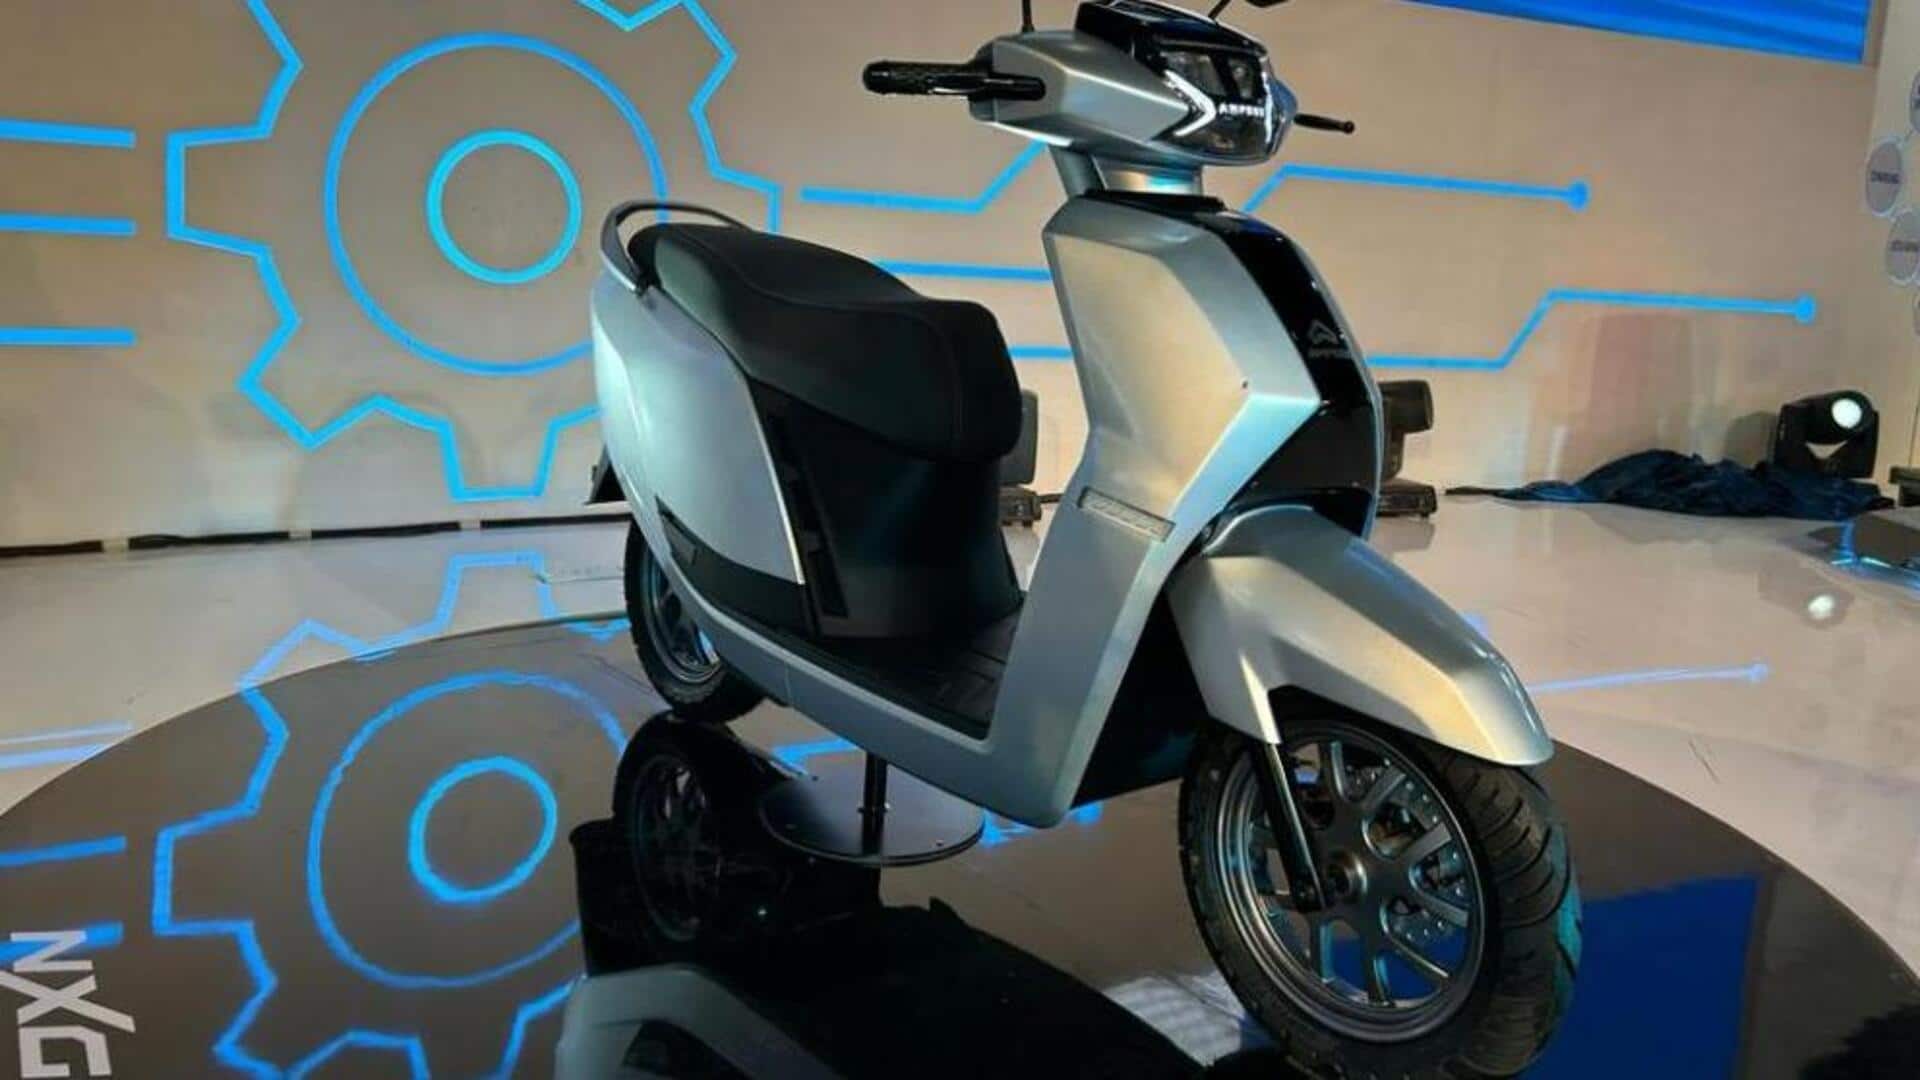 Ampere NXG e-scooter spotted testing in India: What to expect